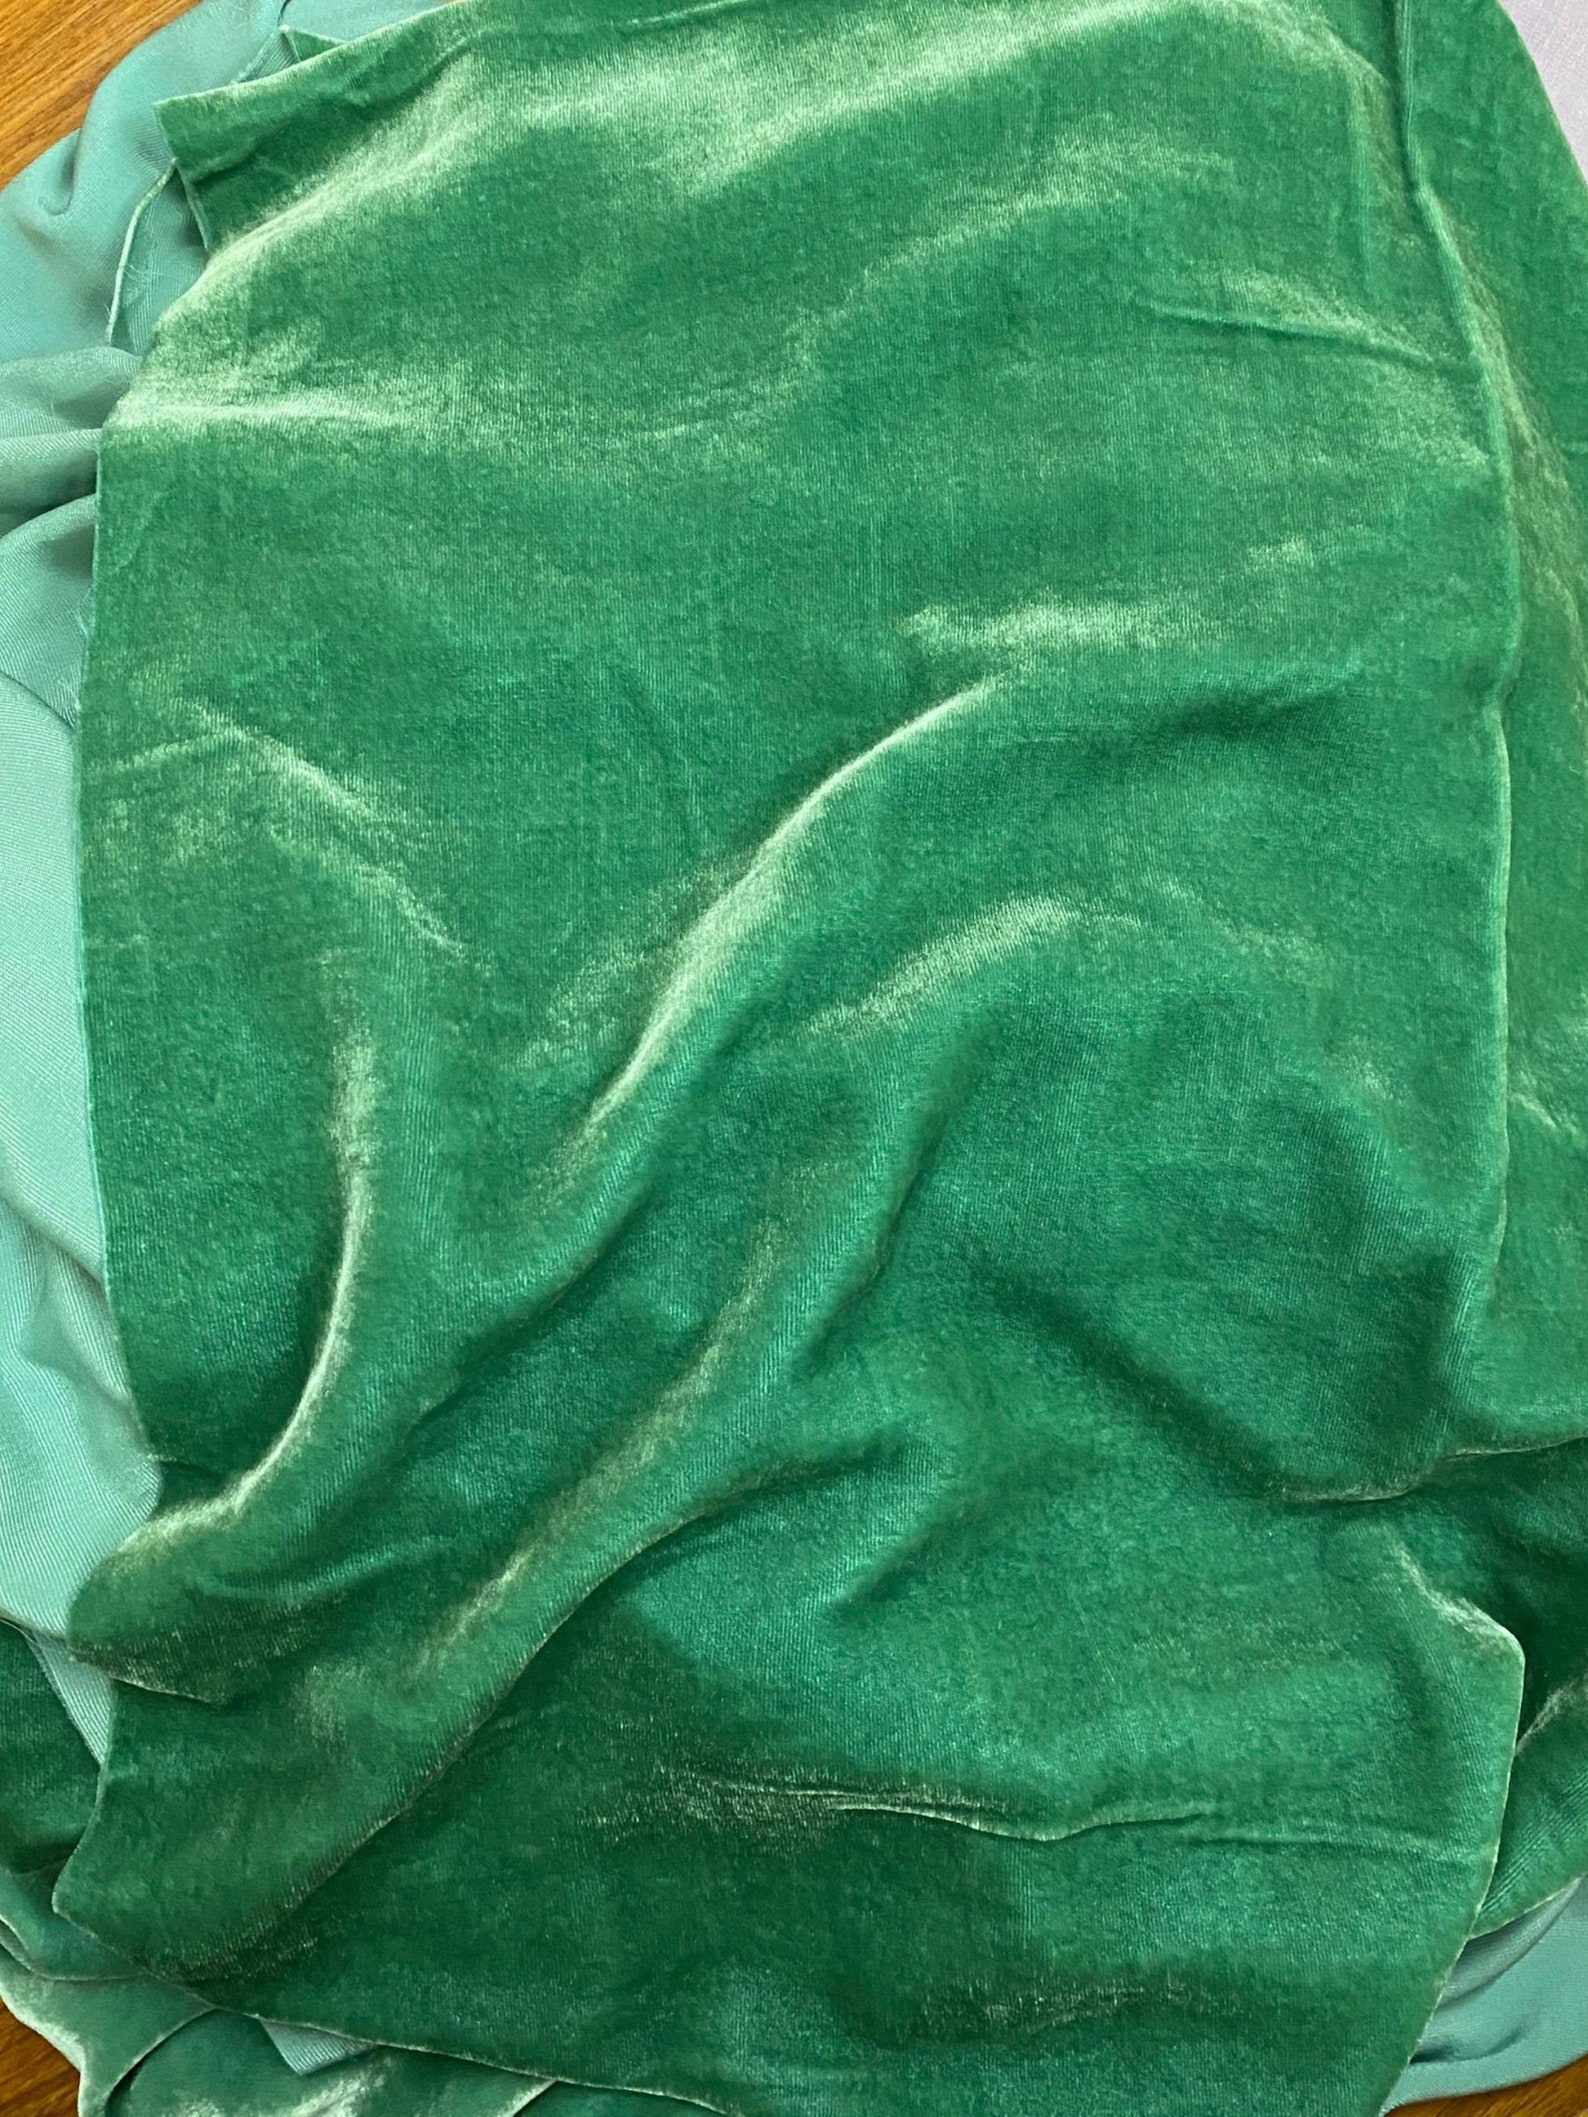 Emerald Silk Velvet by the Yard Emerald Color Mulberry Silk - Etsy